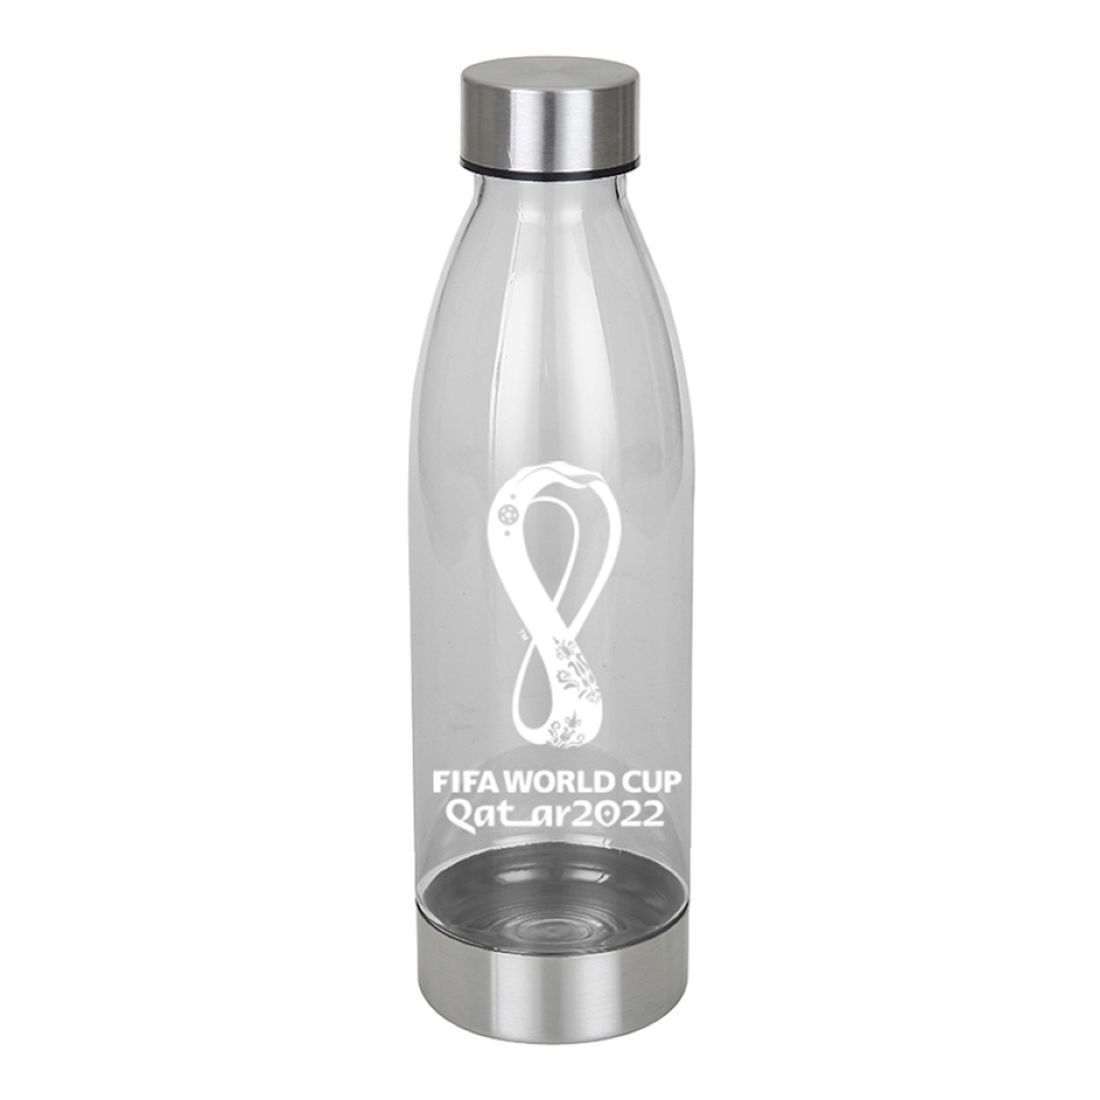 Fifa World Cup 2022 Printed Tritan Sport Bottle Silver With Metal Lid - Clear Silver 650 ml